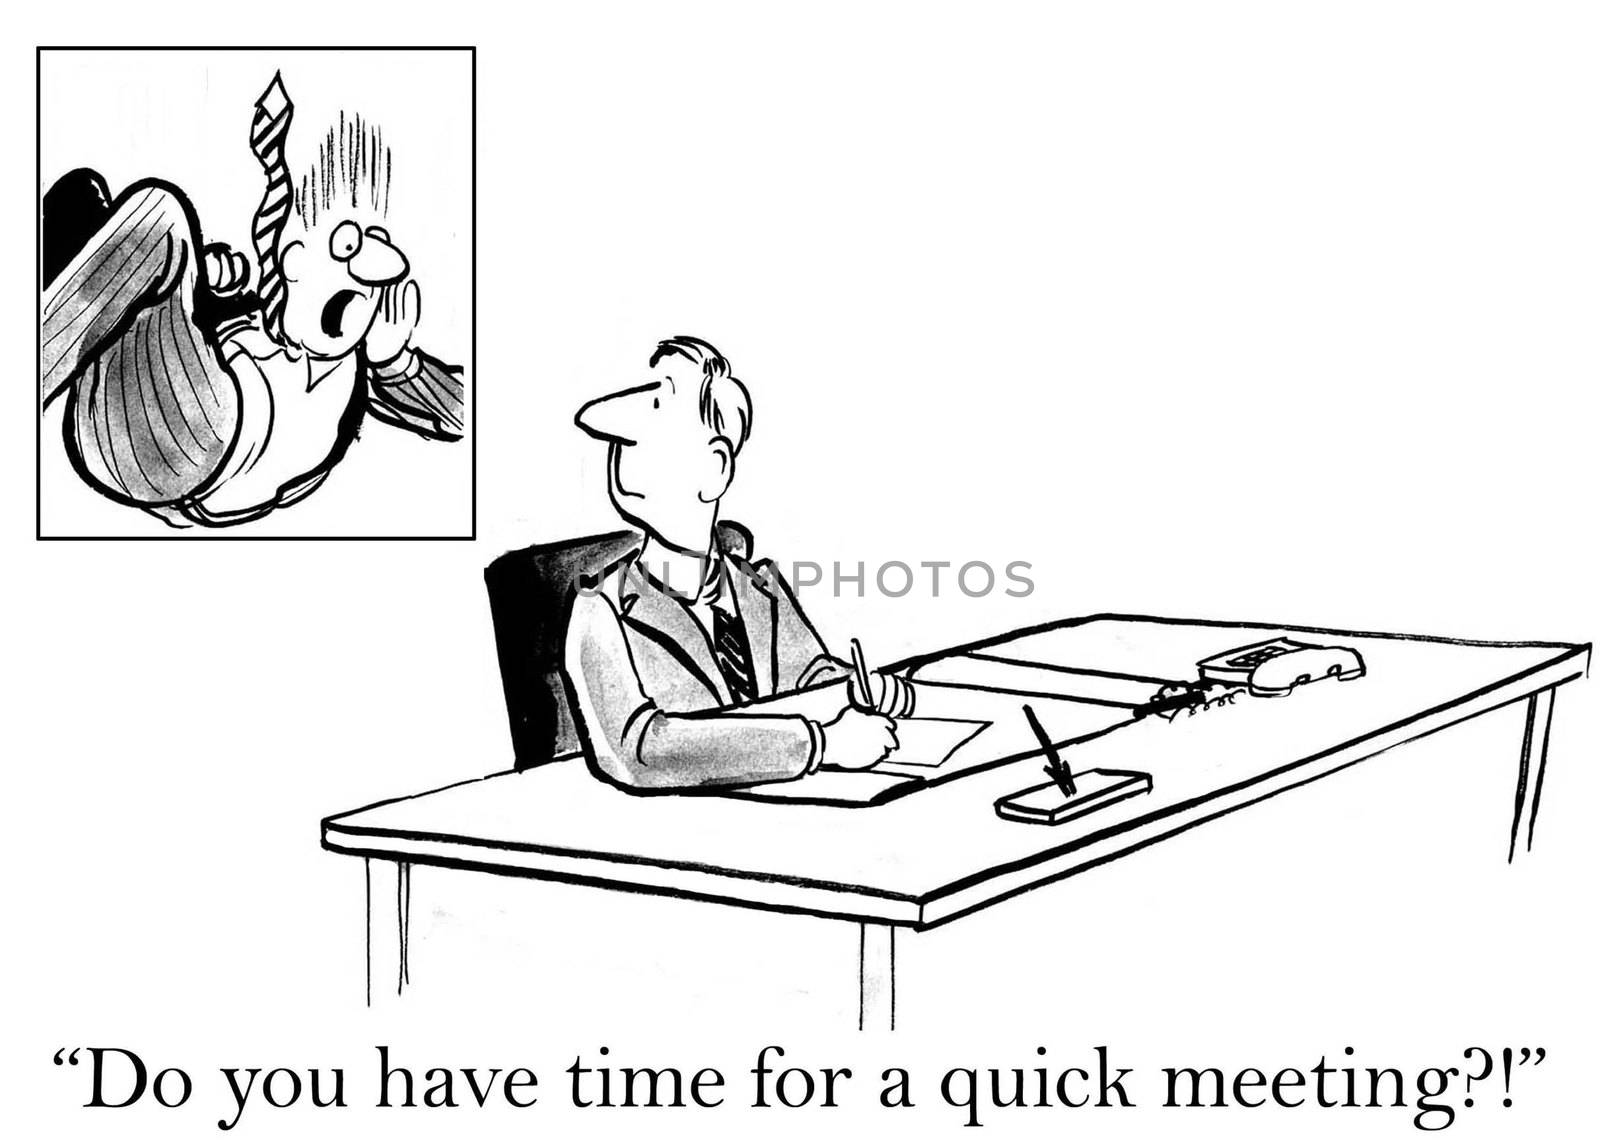 "Do you have time for a quick meeting?"